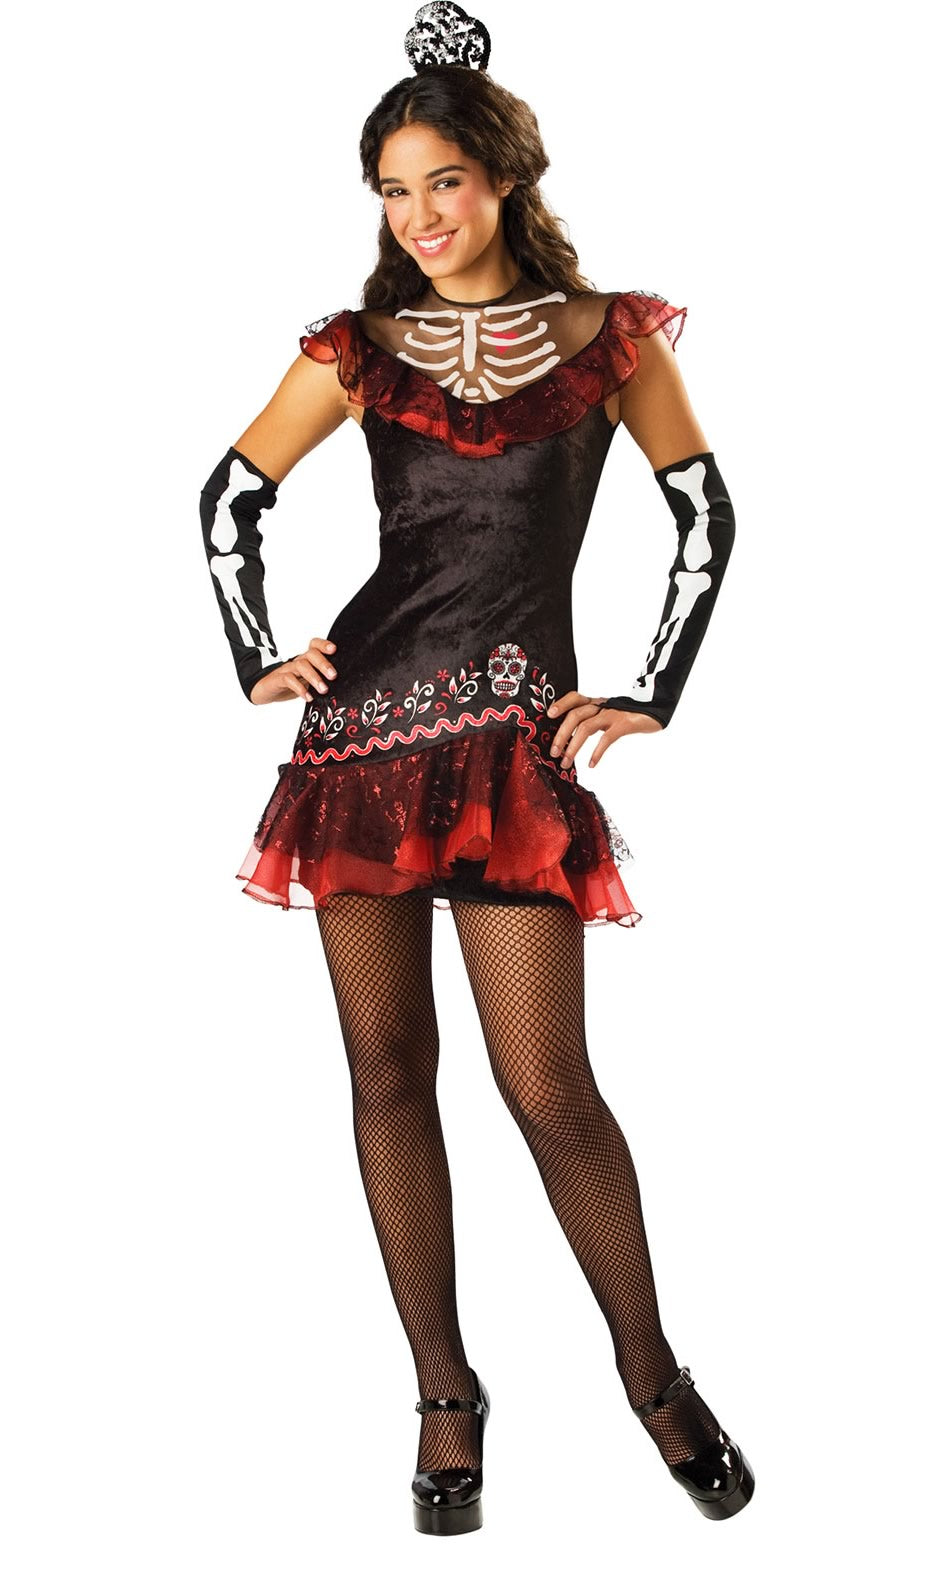 Short red and black skeleton style Day of the Dead dress with headpiece